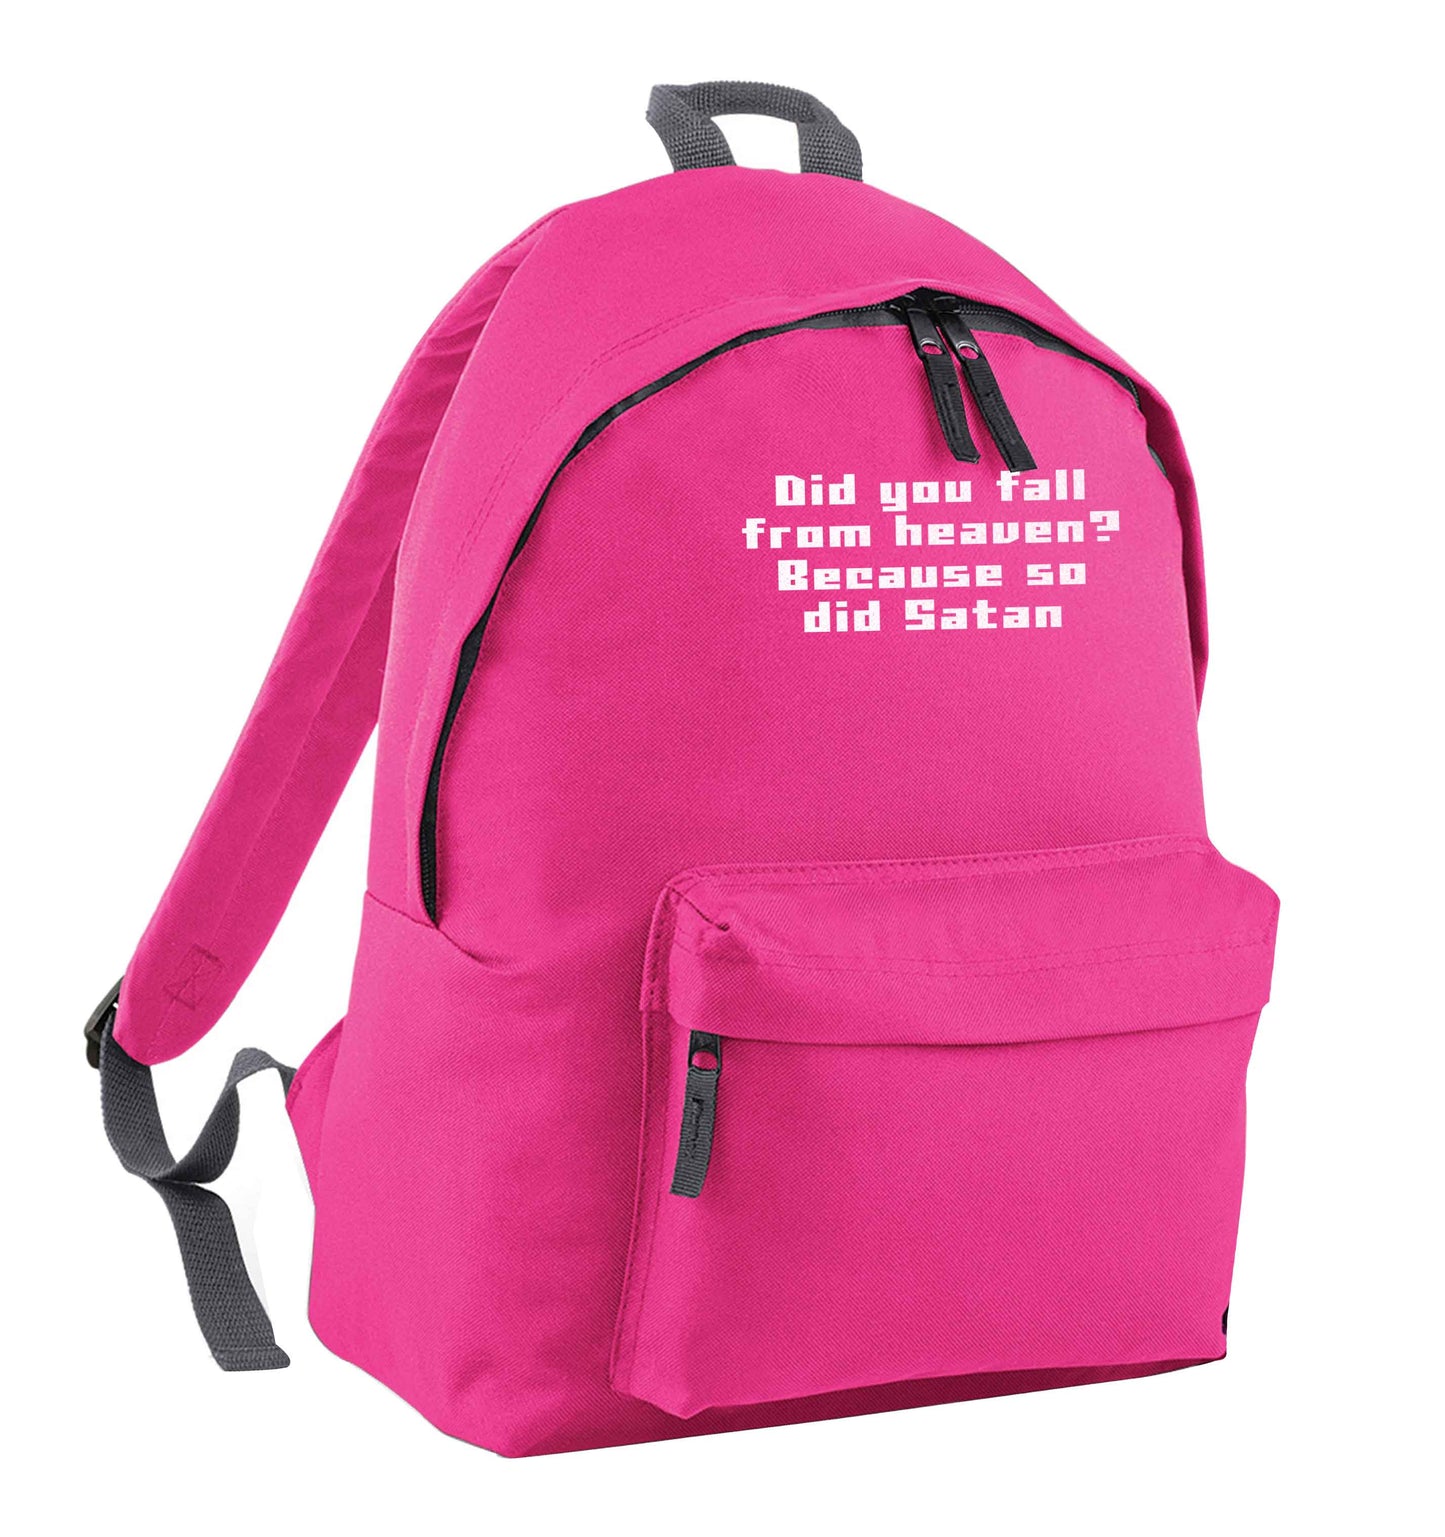 Did you fall from Heaven because so did Satan pink adults backpack